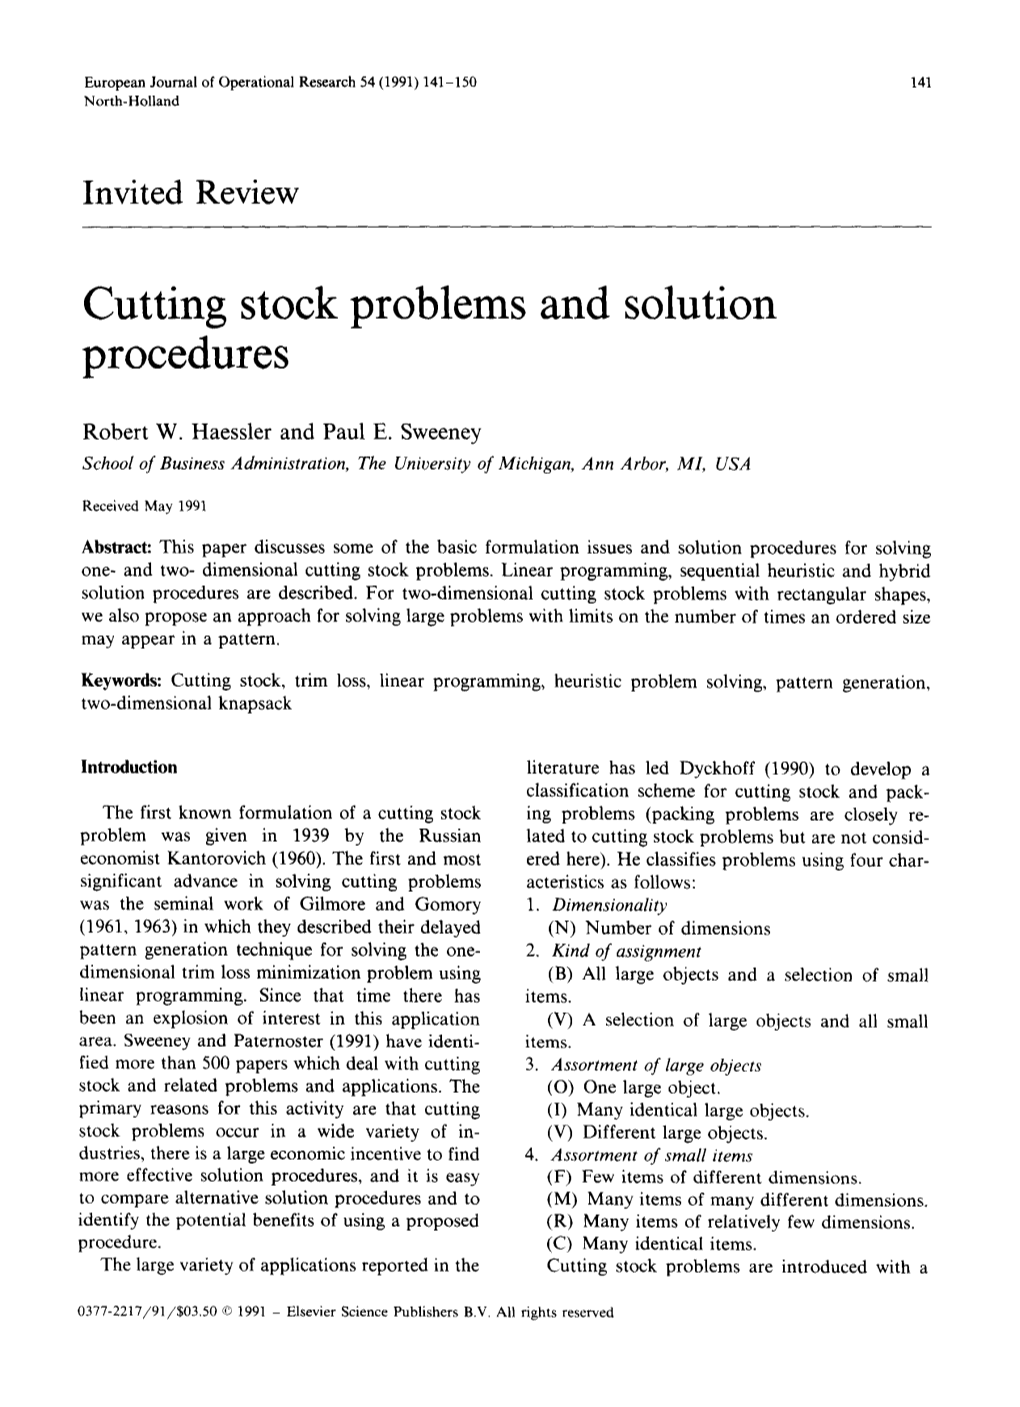 Cutting Stock Problems and Solution Procedures